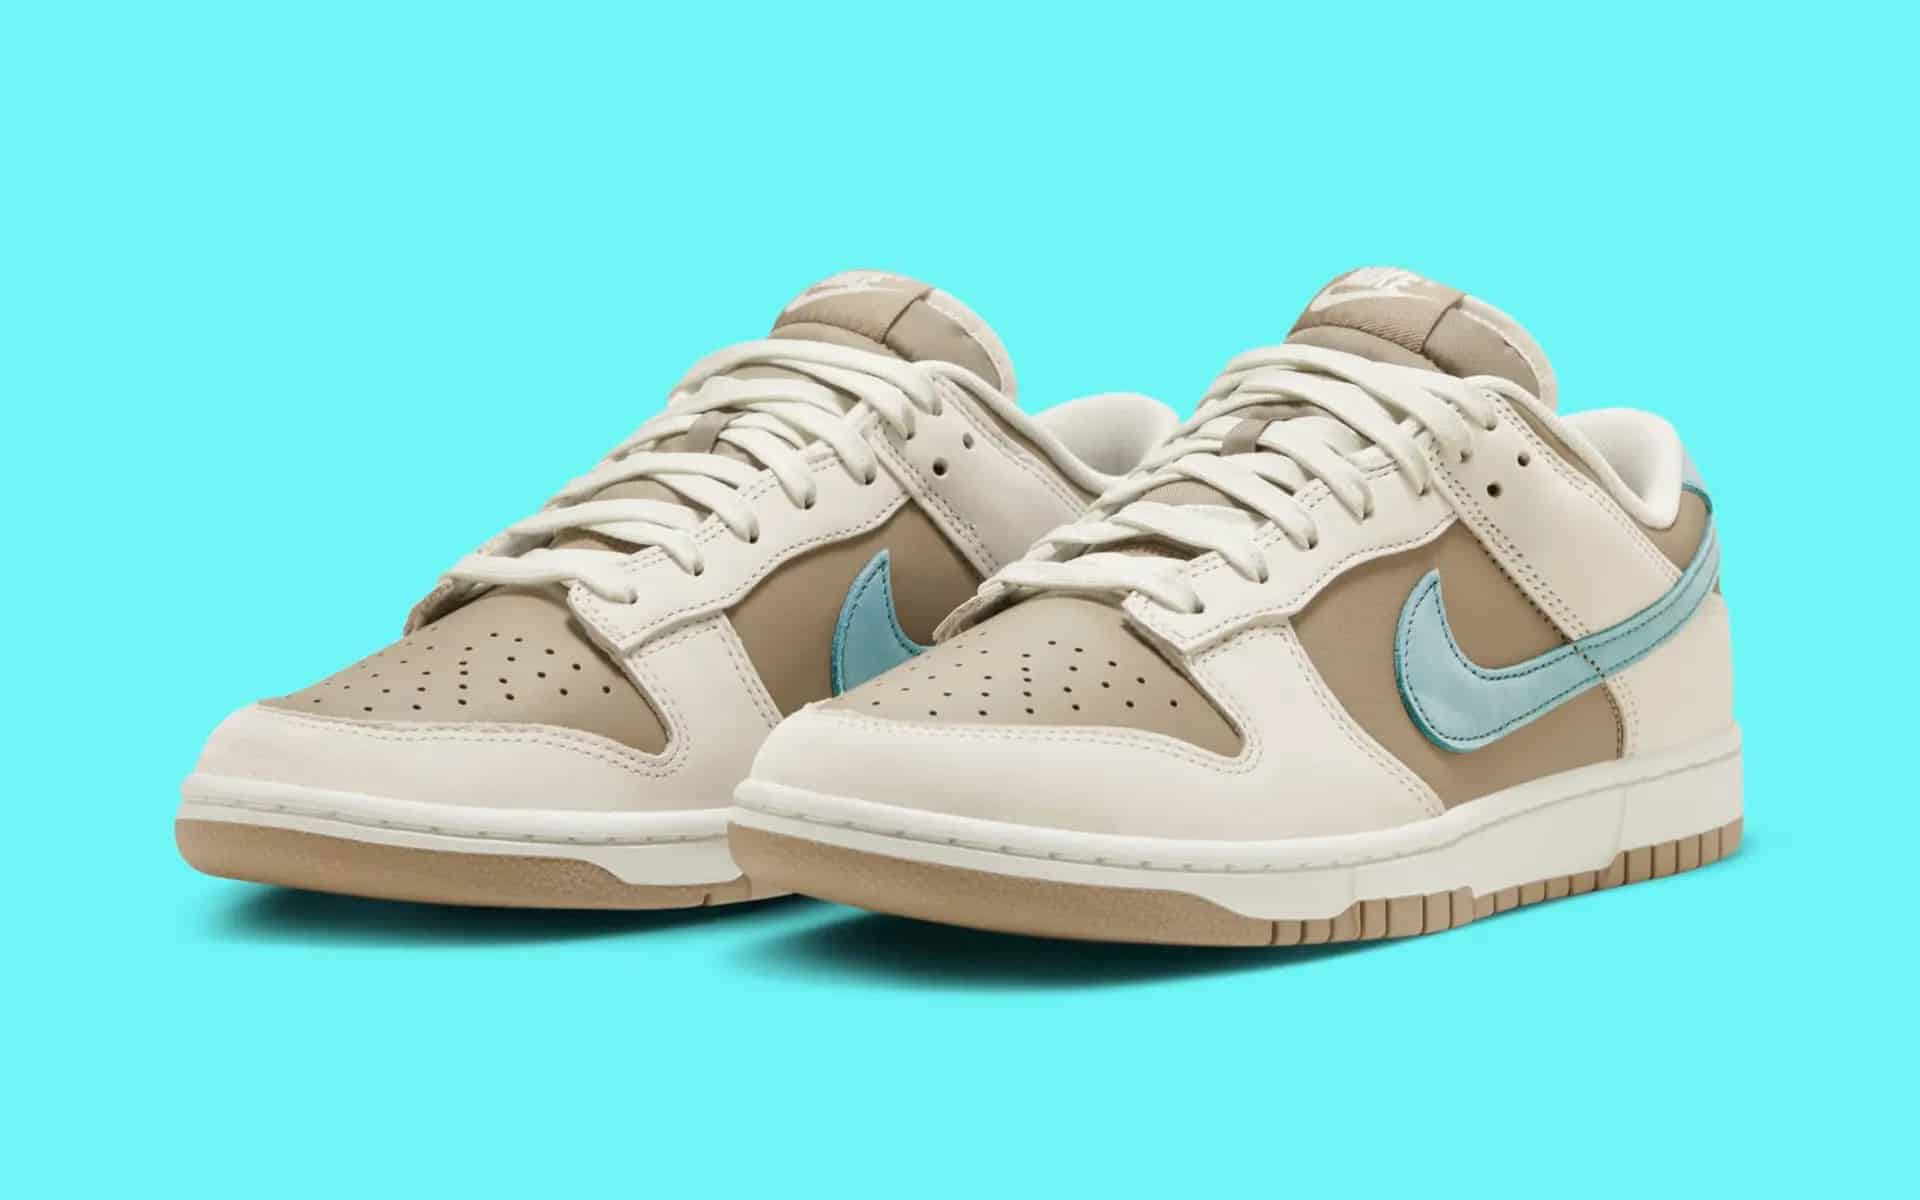 preview nike Trainers dunk low khaki denim turquoise hq1175 240 3